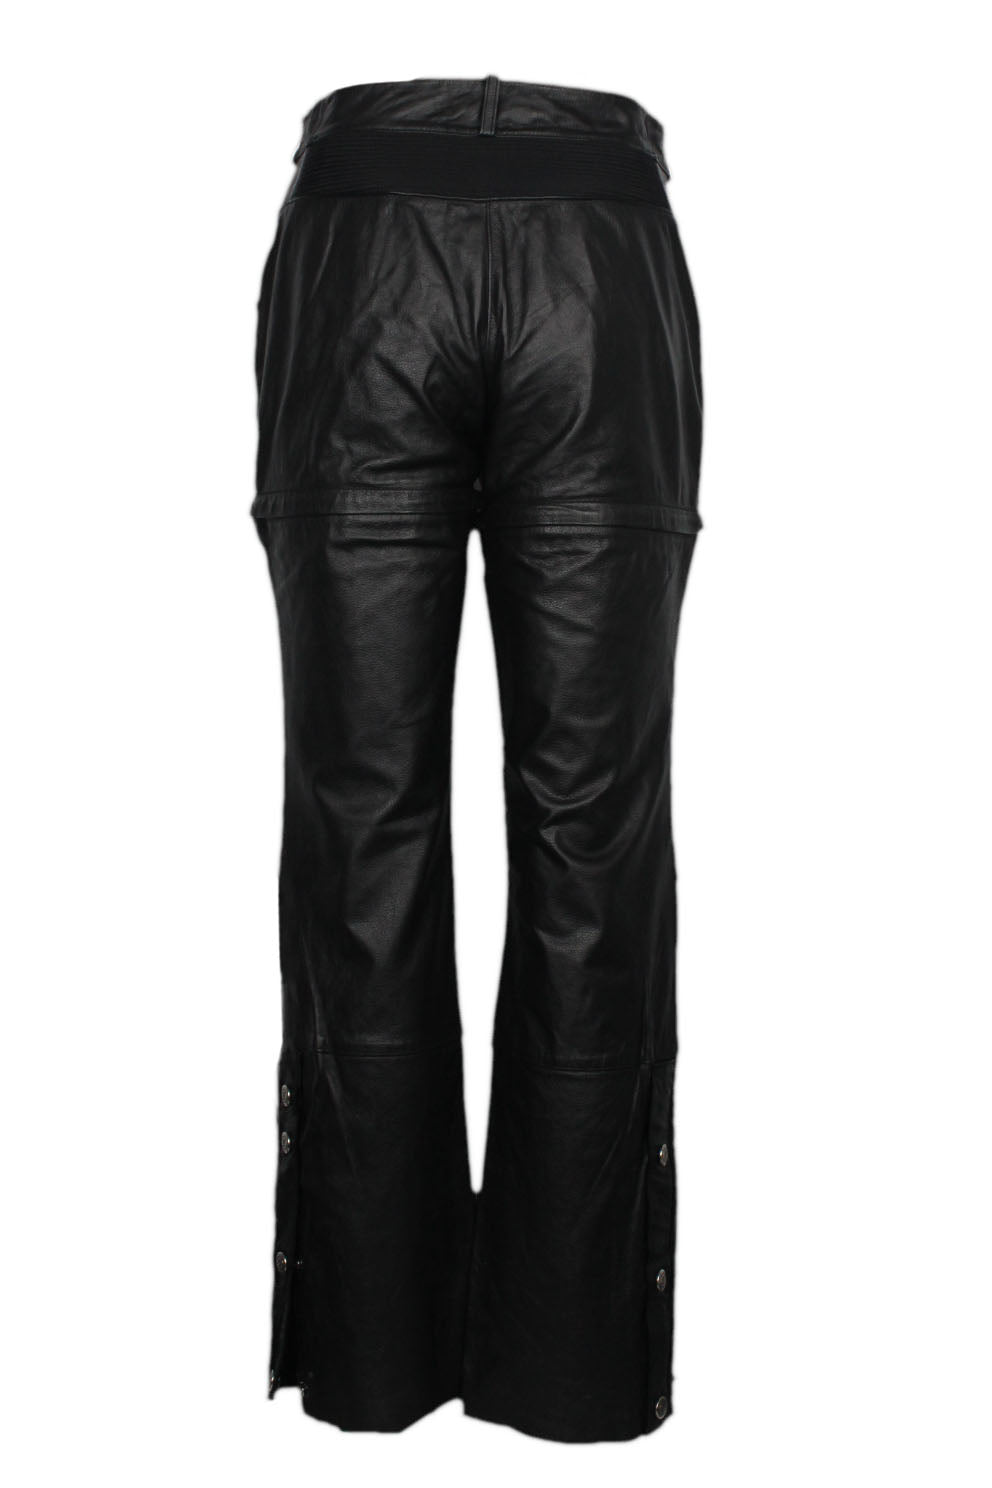 back of leather pants,